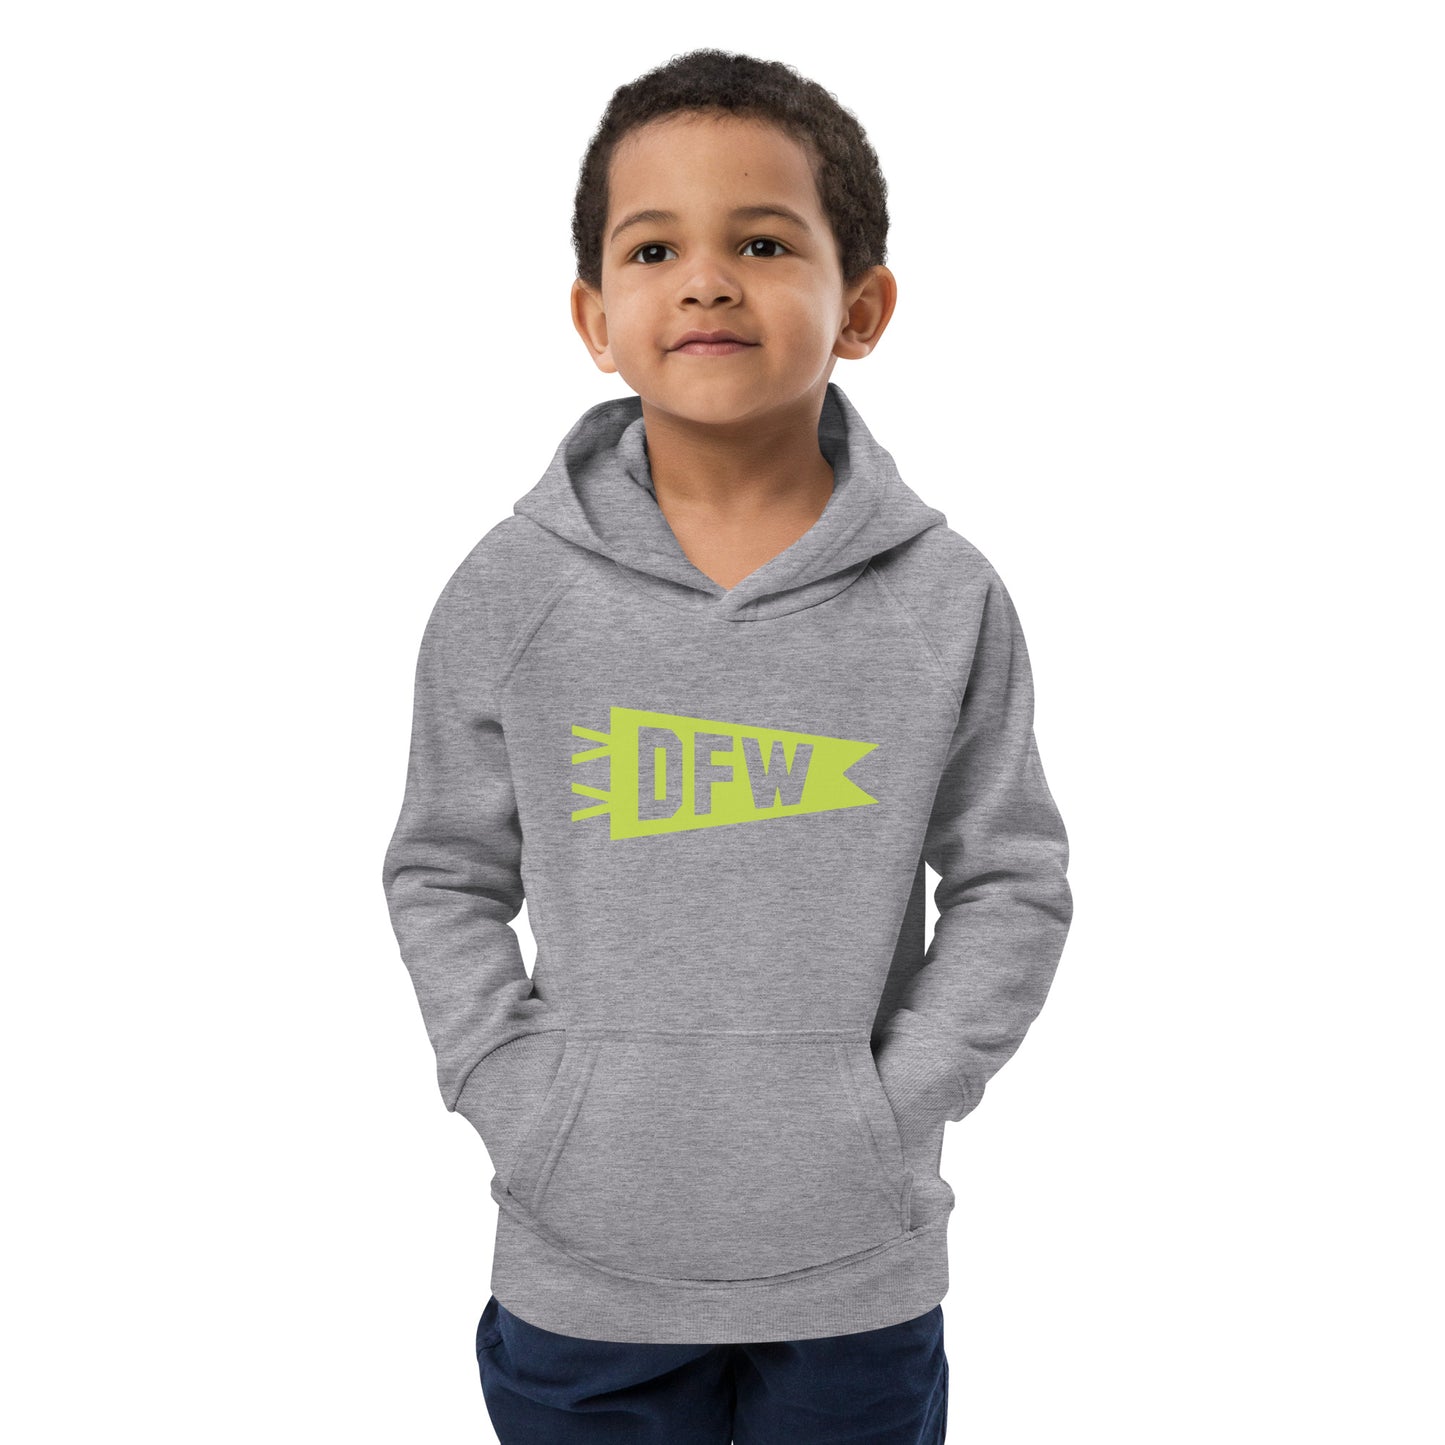 Kid's Sustainable Hoodie - Green Graphic • DFW Dallas • YHM Designs - Image 11